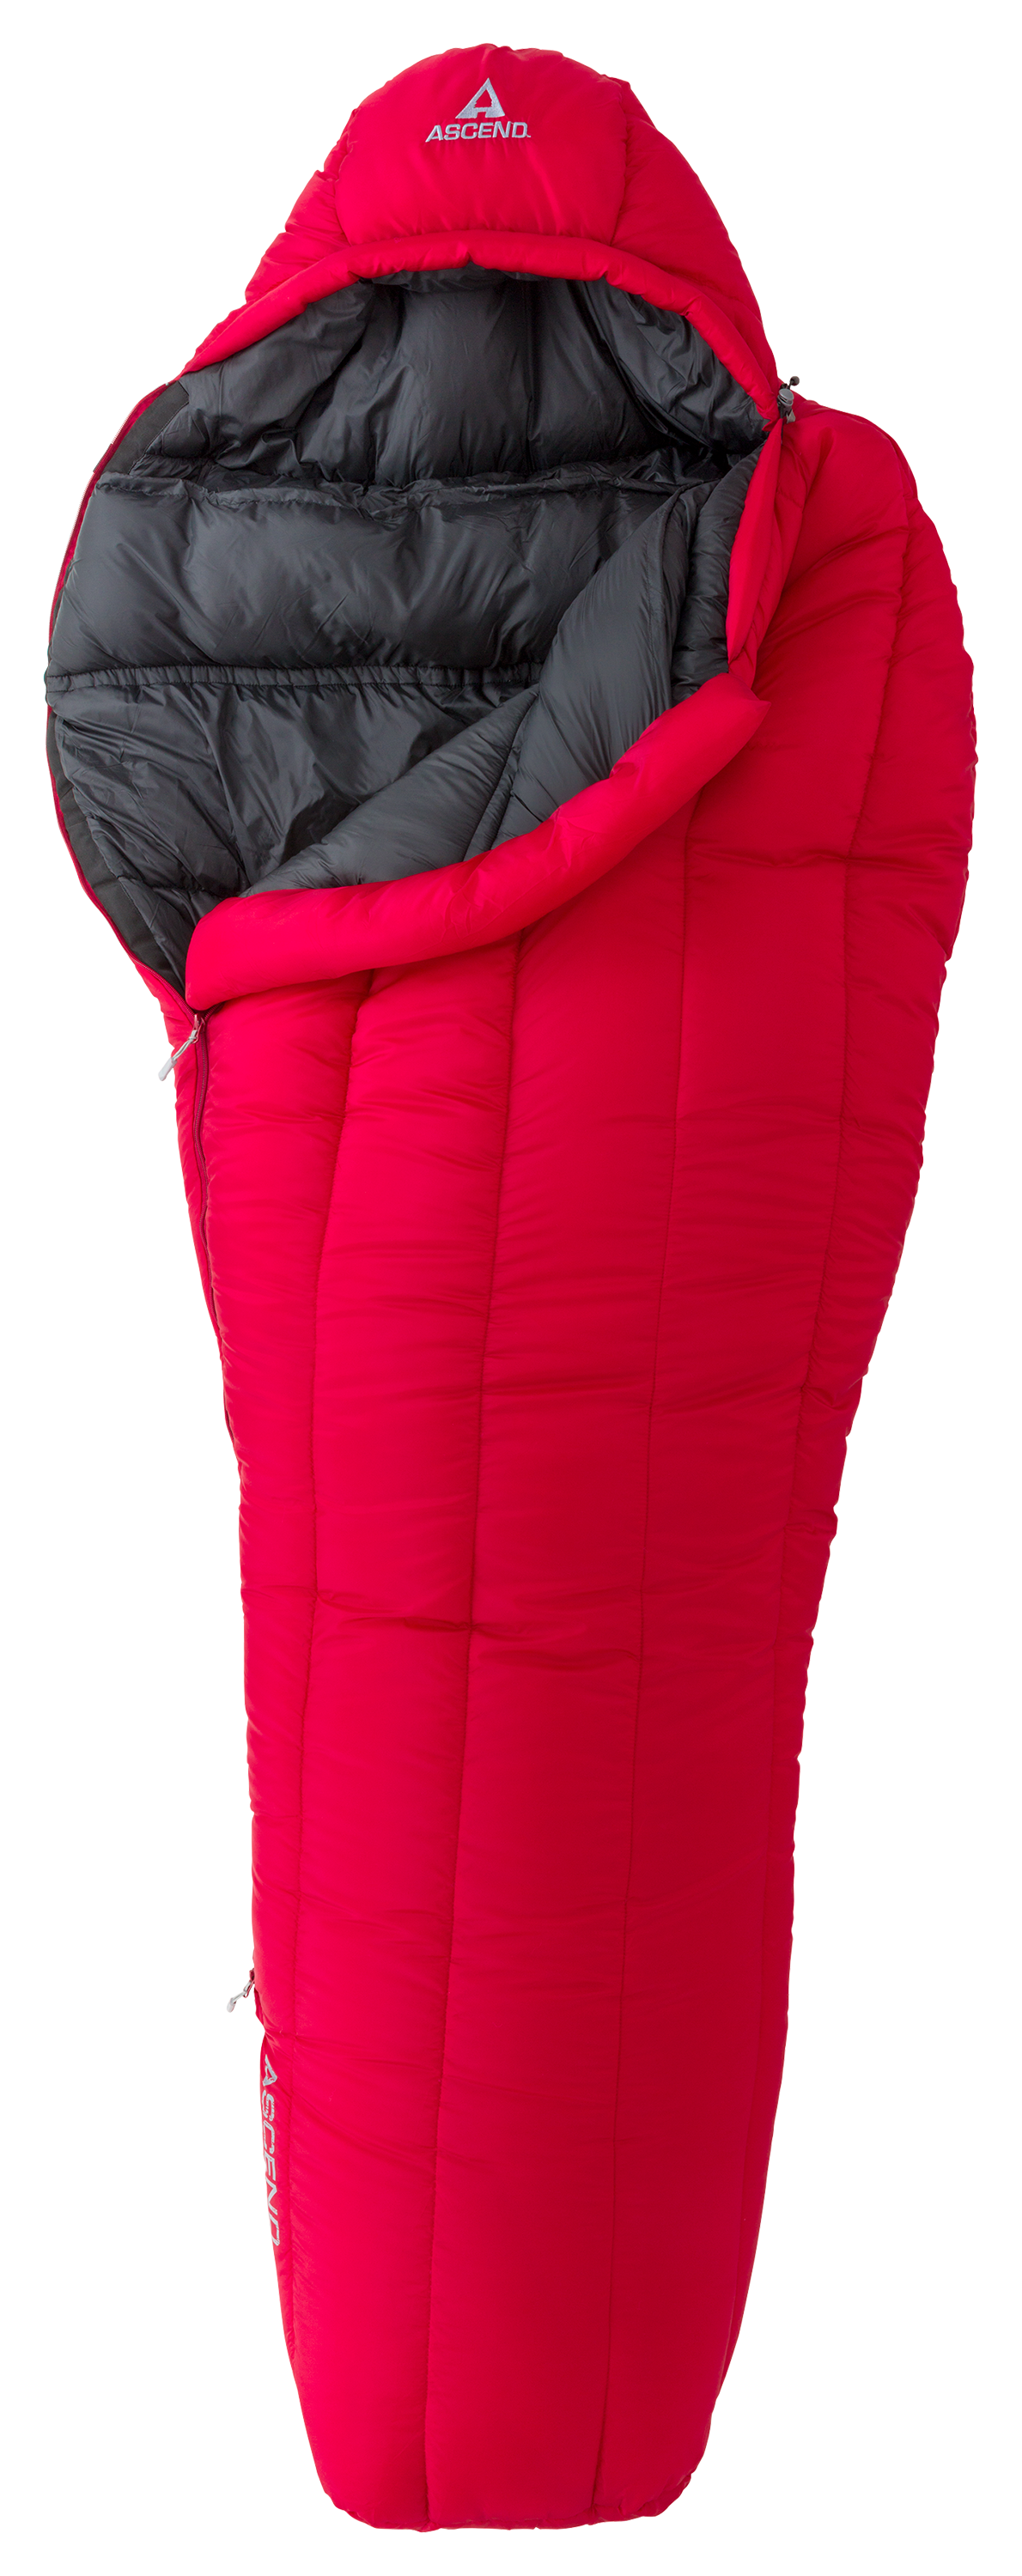 The Ascend Whammy -20 Mummy Sleeping Bag - Fits to 6'